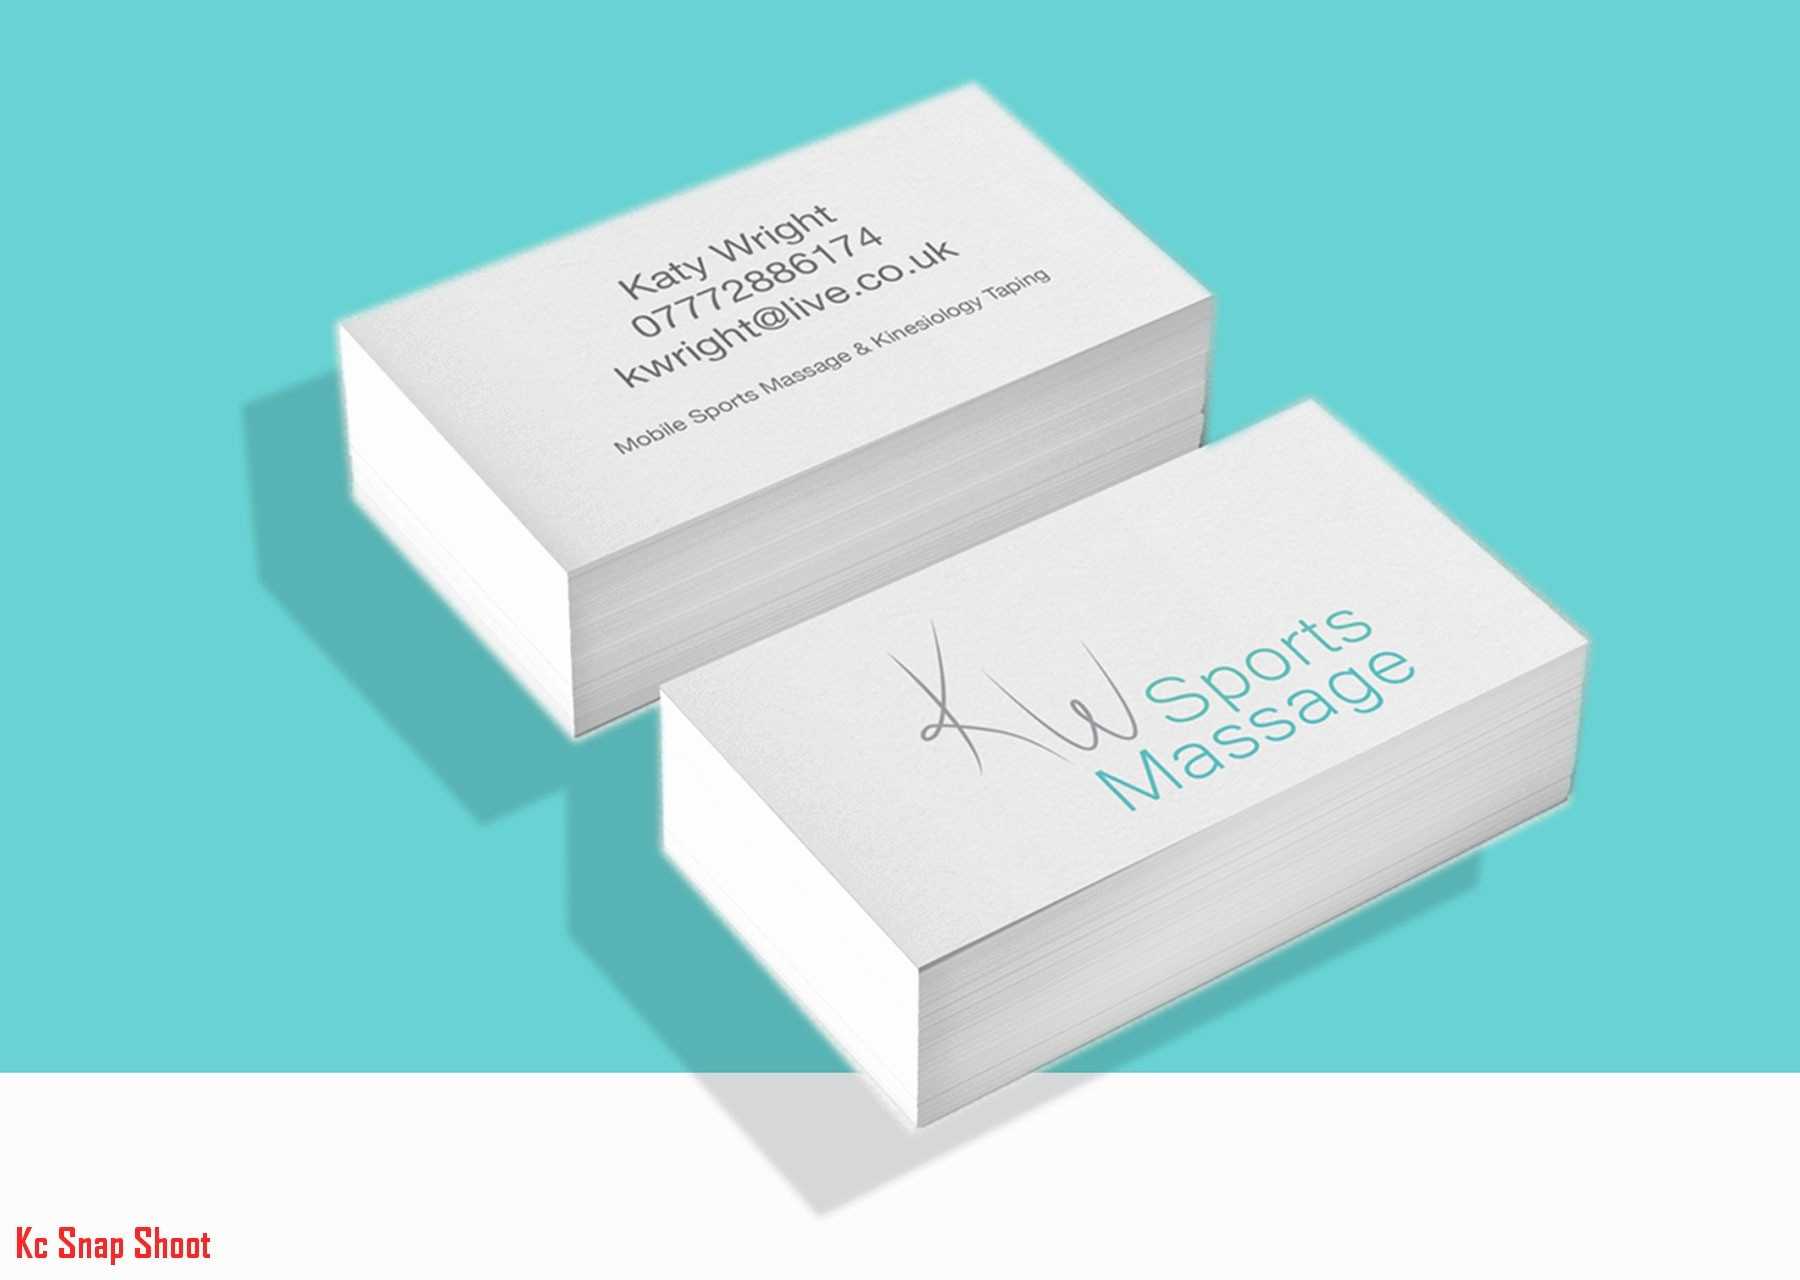 Massage Therapy Business Card Templates Free Dance Cards For Massage Therapy Business Card Templates